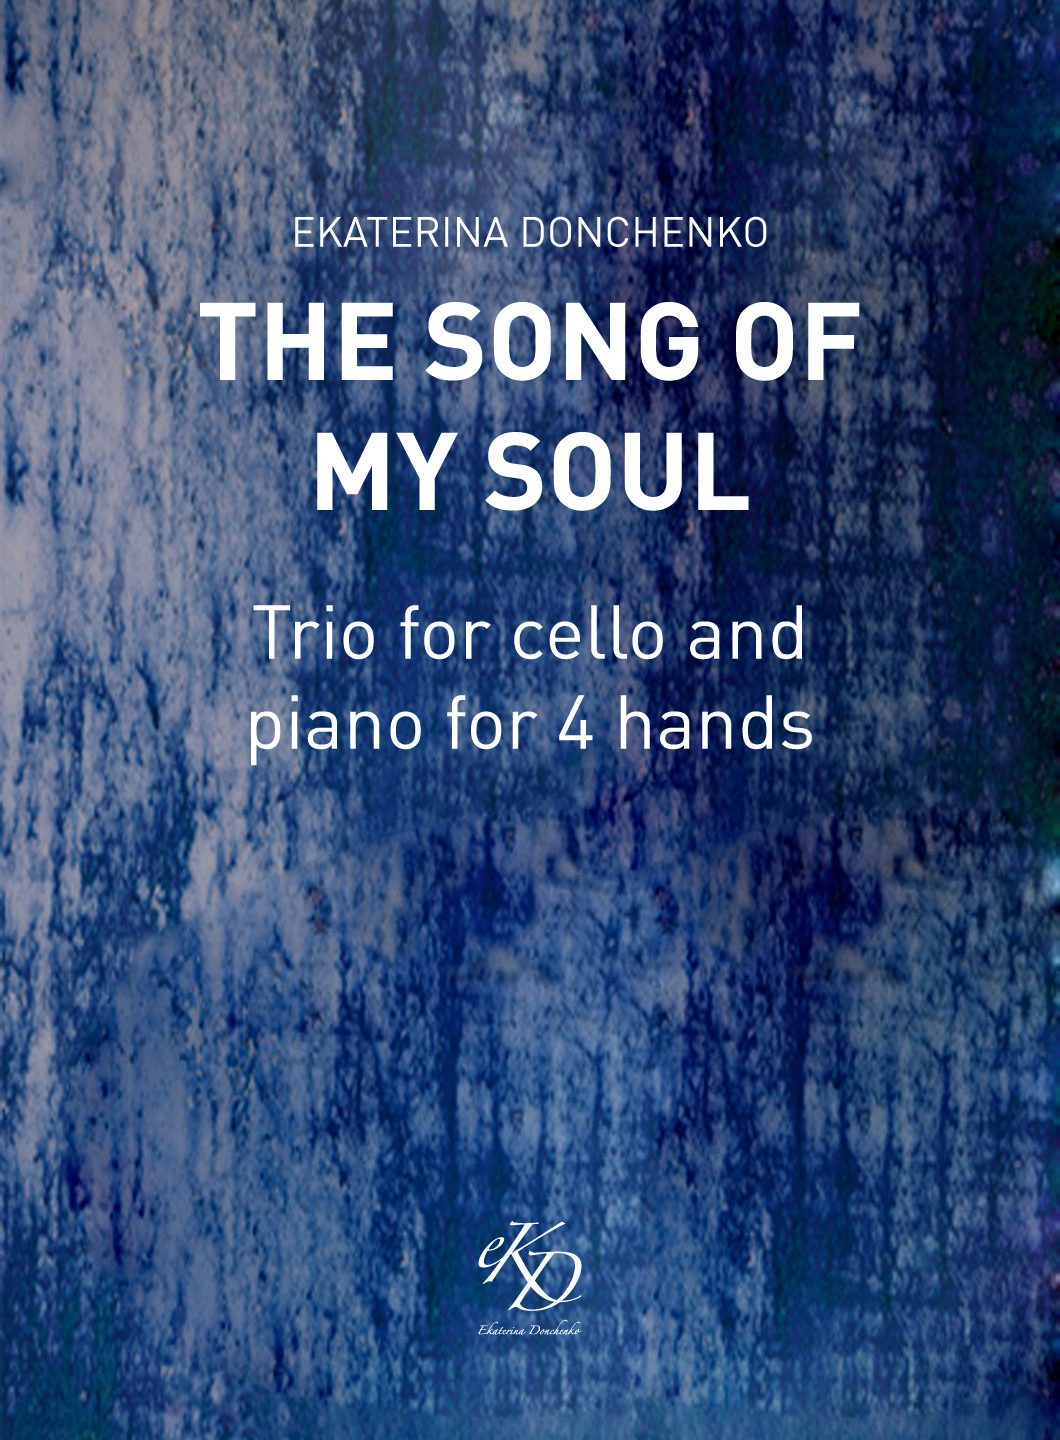 THE SONG OF MY SOUL – TRIO